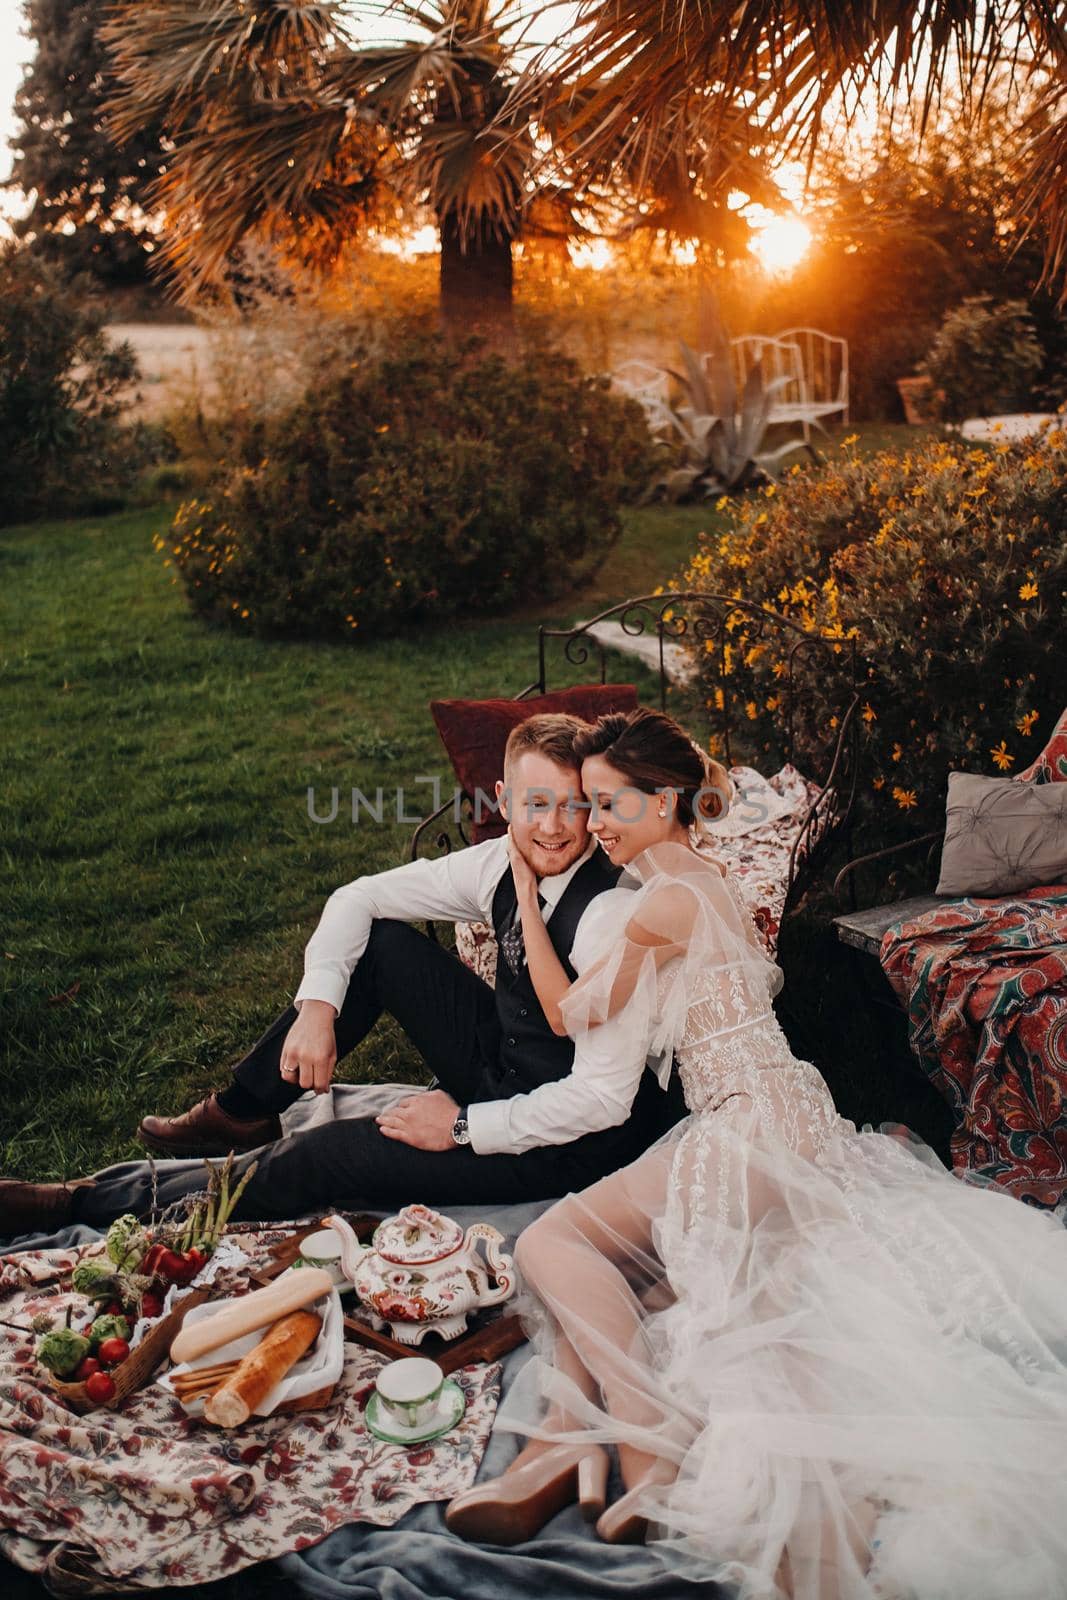 Dinner the Bridal couple at the picnic.A couple is relaxing at sunset in France.Bride and groom on a picnic in Provence. by Lobachad